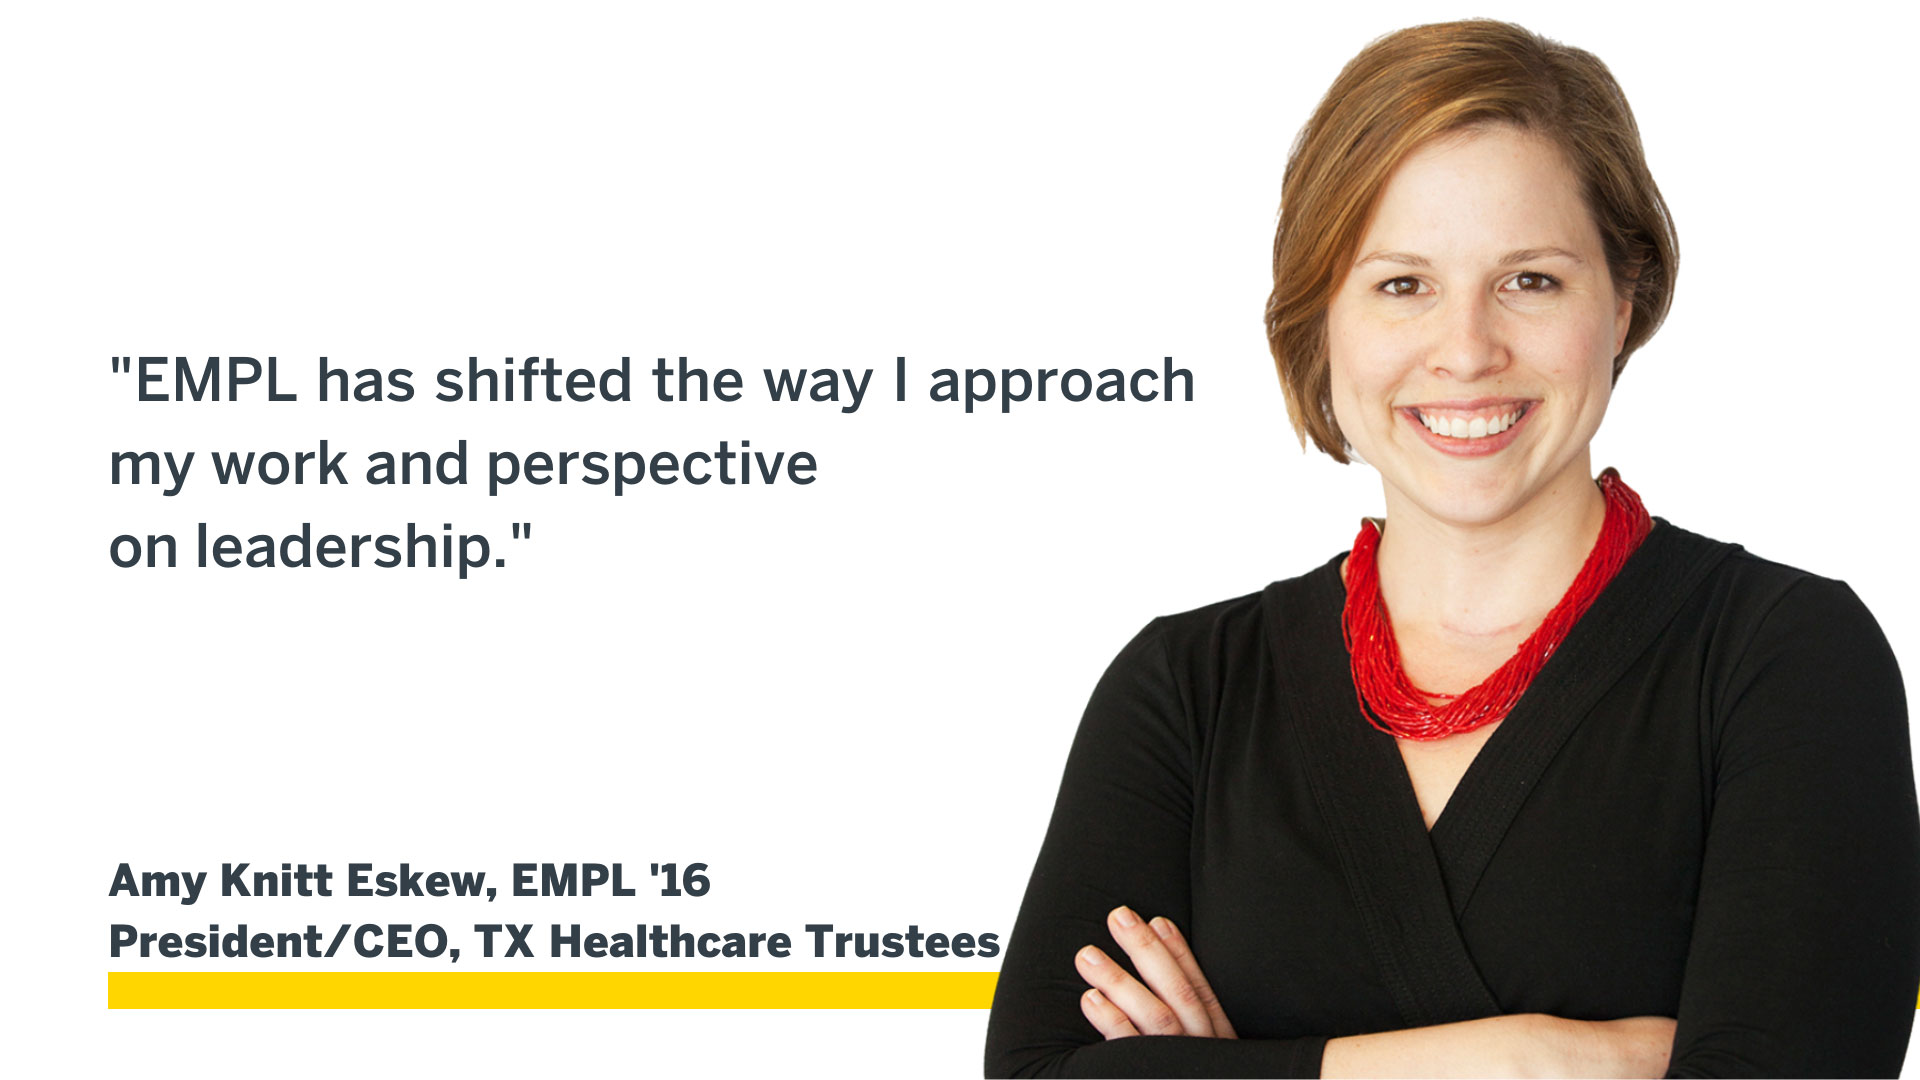 Amy Knitt Eskew - EMPL has shifted the way I approach my work and perspective on leadership.